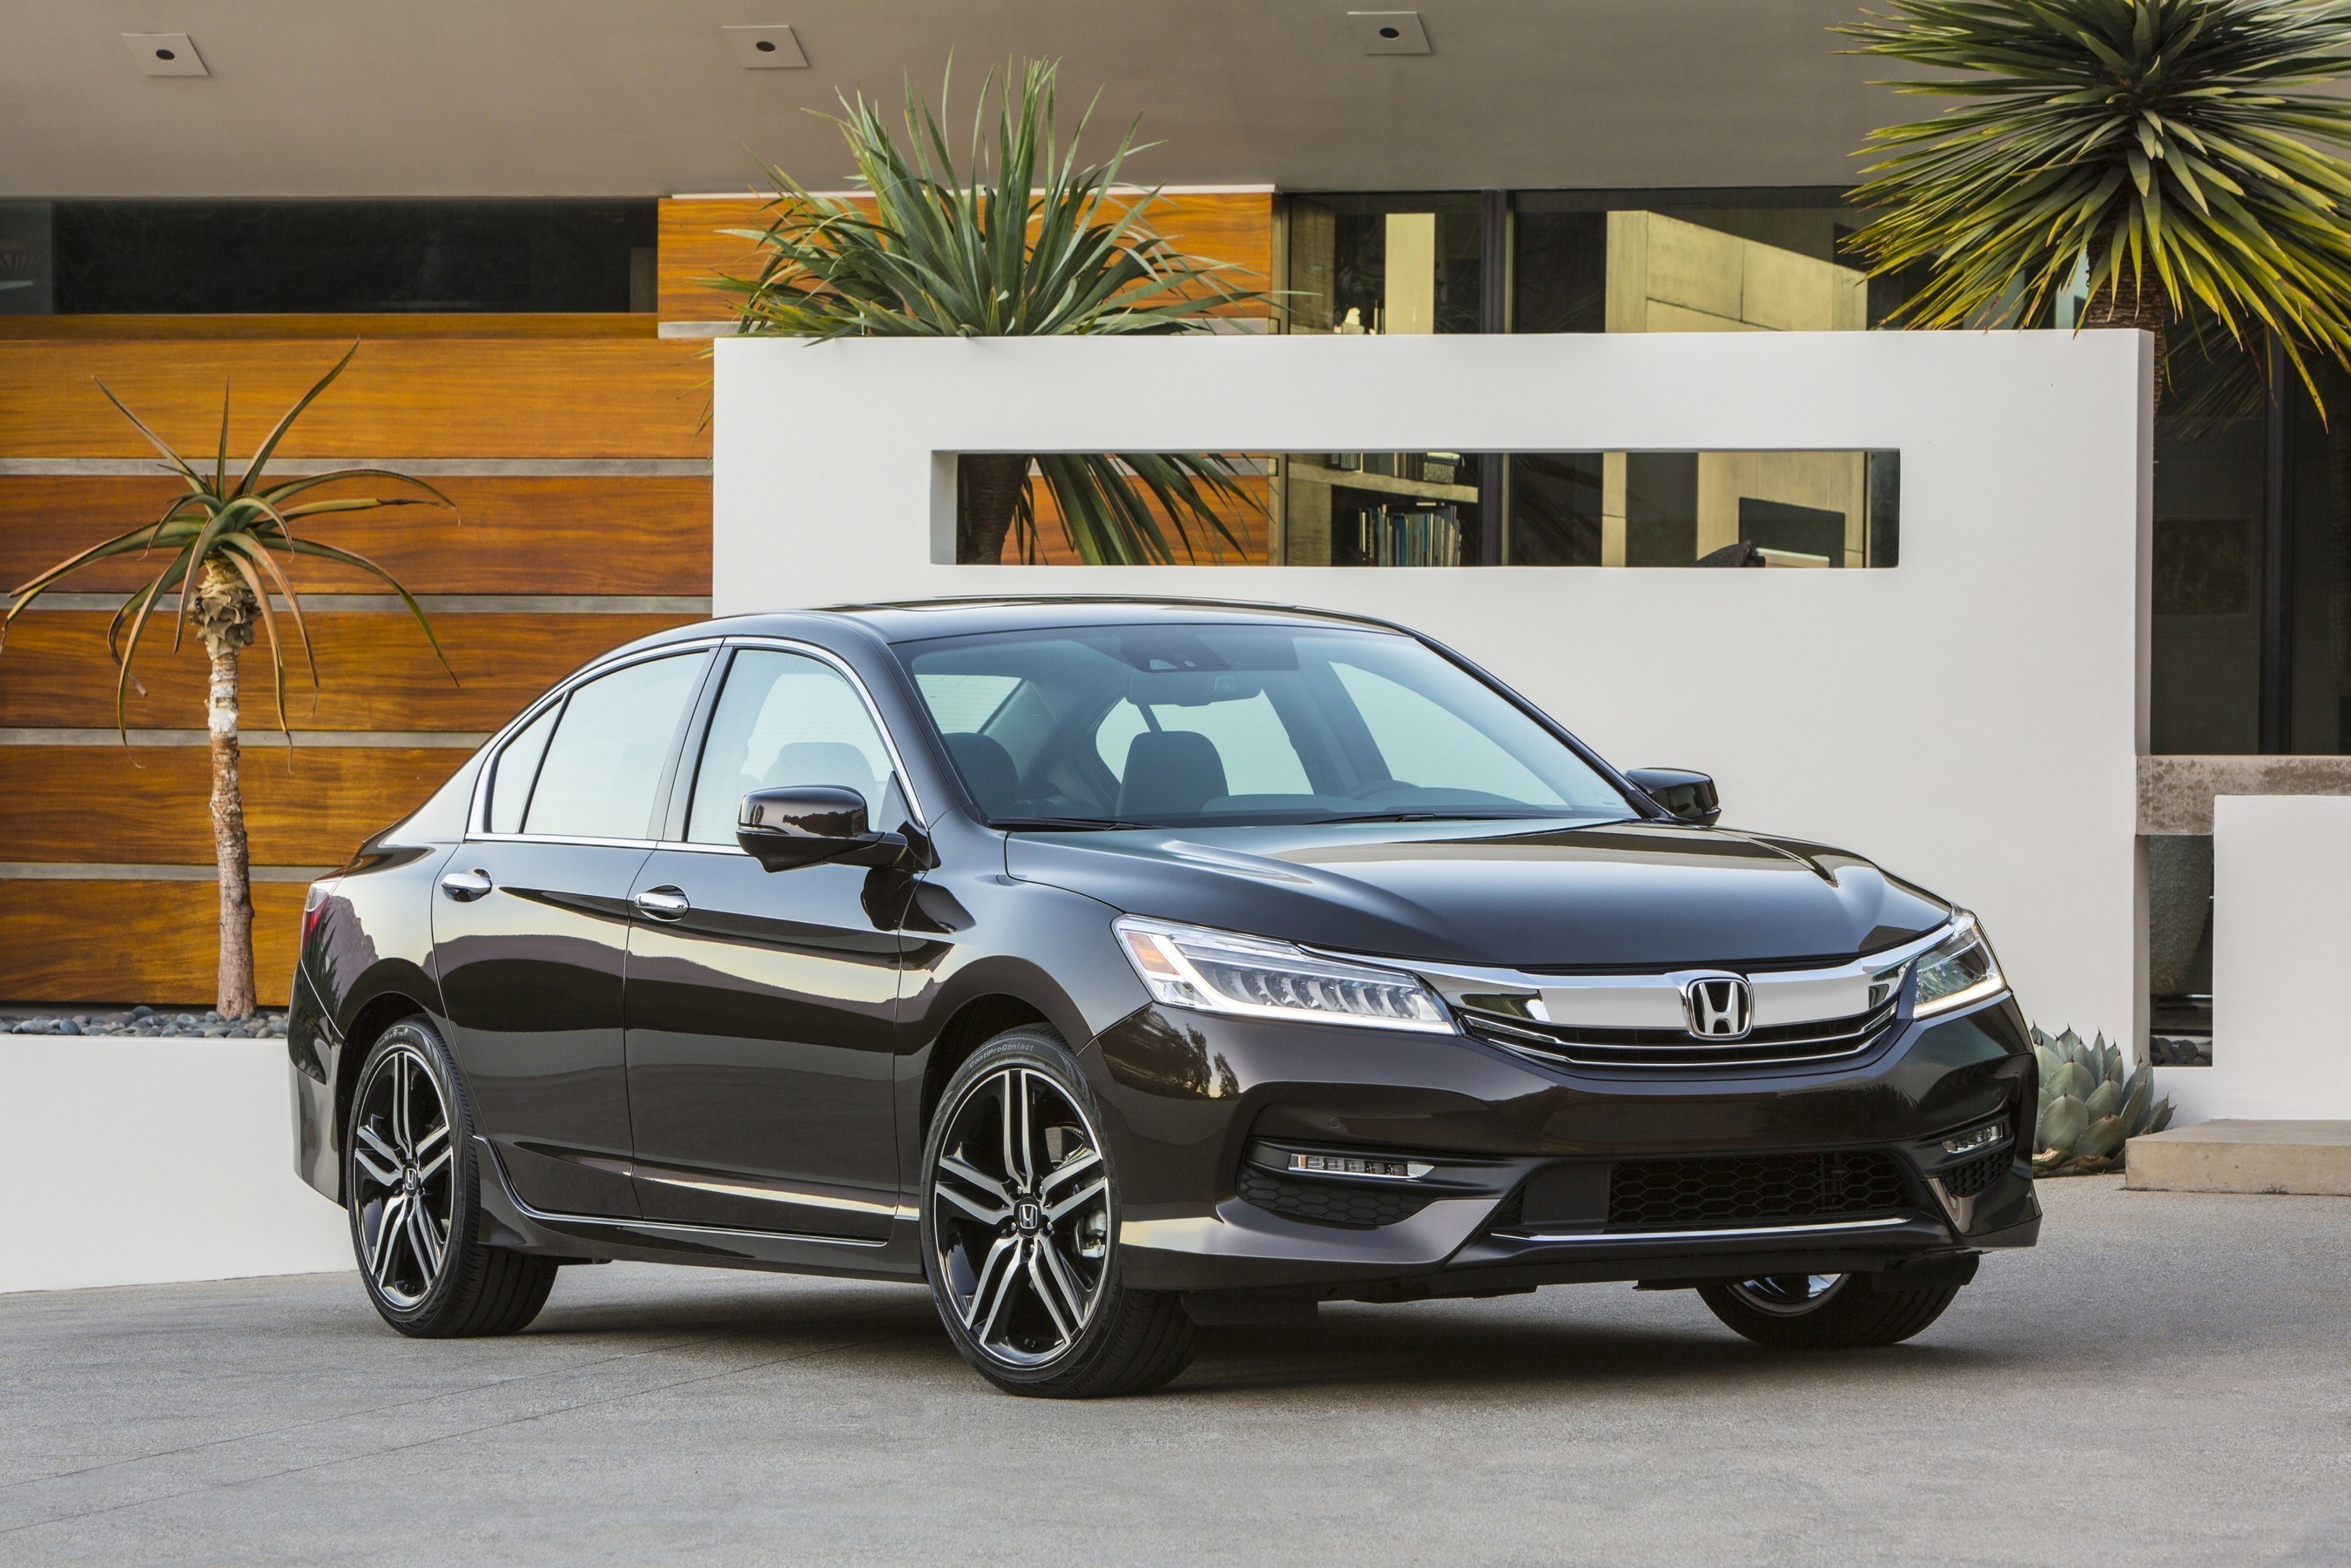 Honda Introduces the Highest Tech Accord Yet in High Tech's U.S. Hub-Silicon Valley